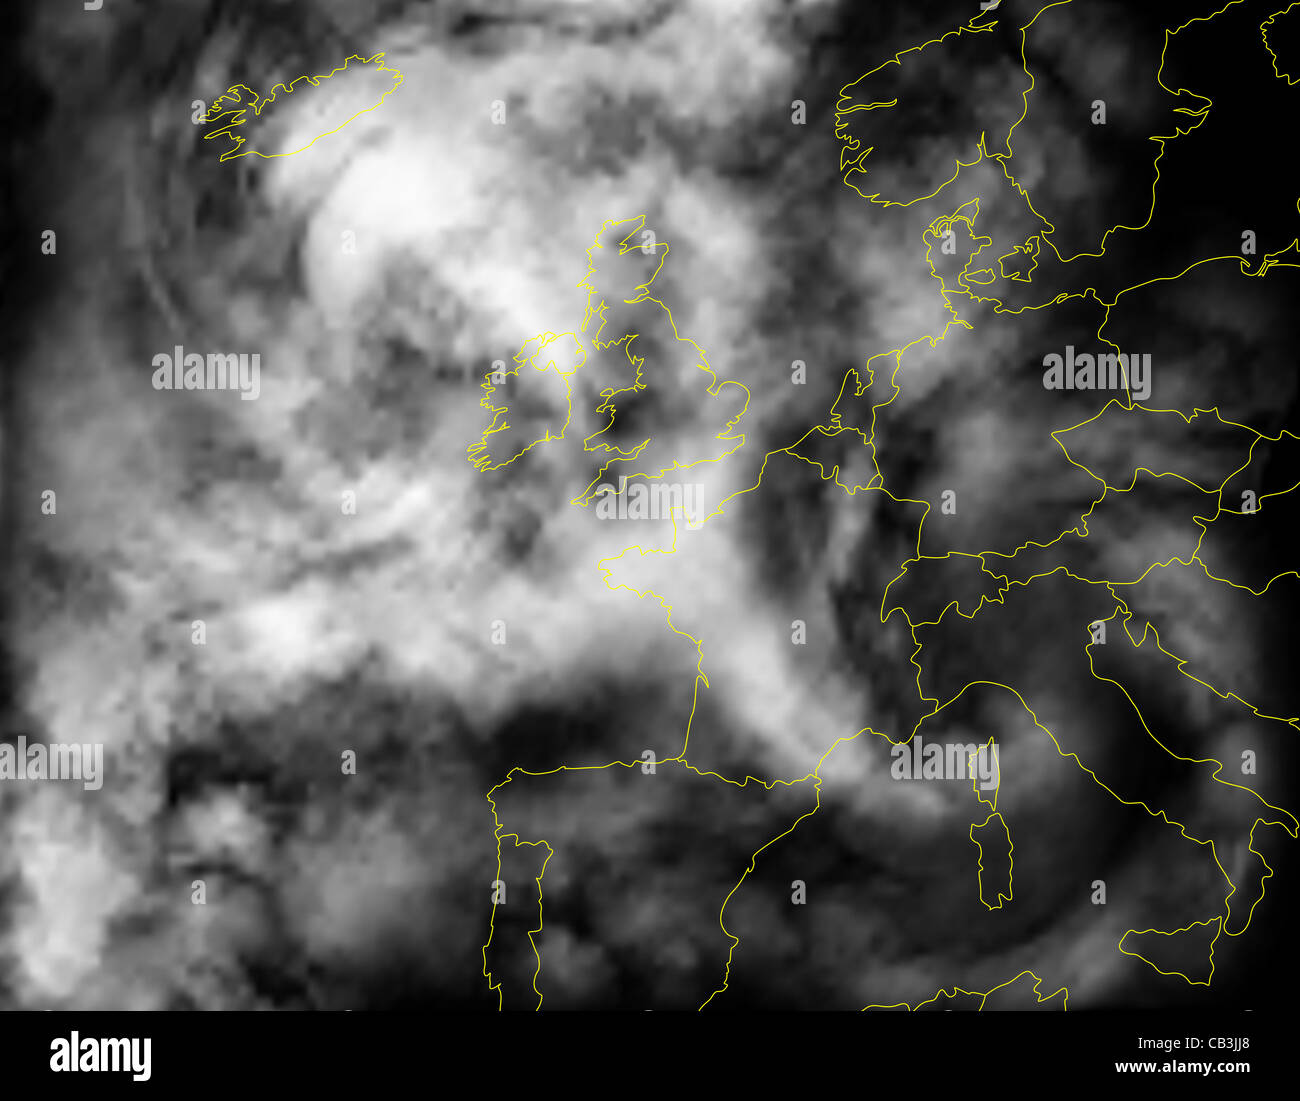 Illustration of cloud cover over Europe on a satellite photograph Stock Photo